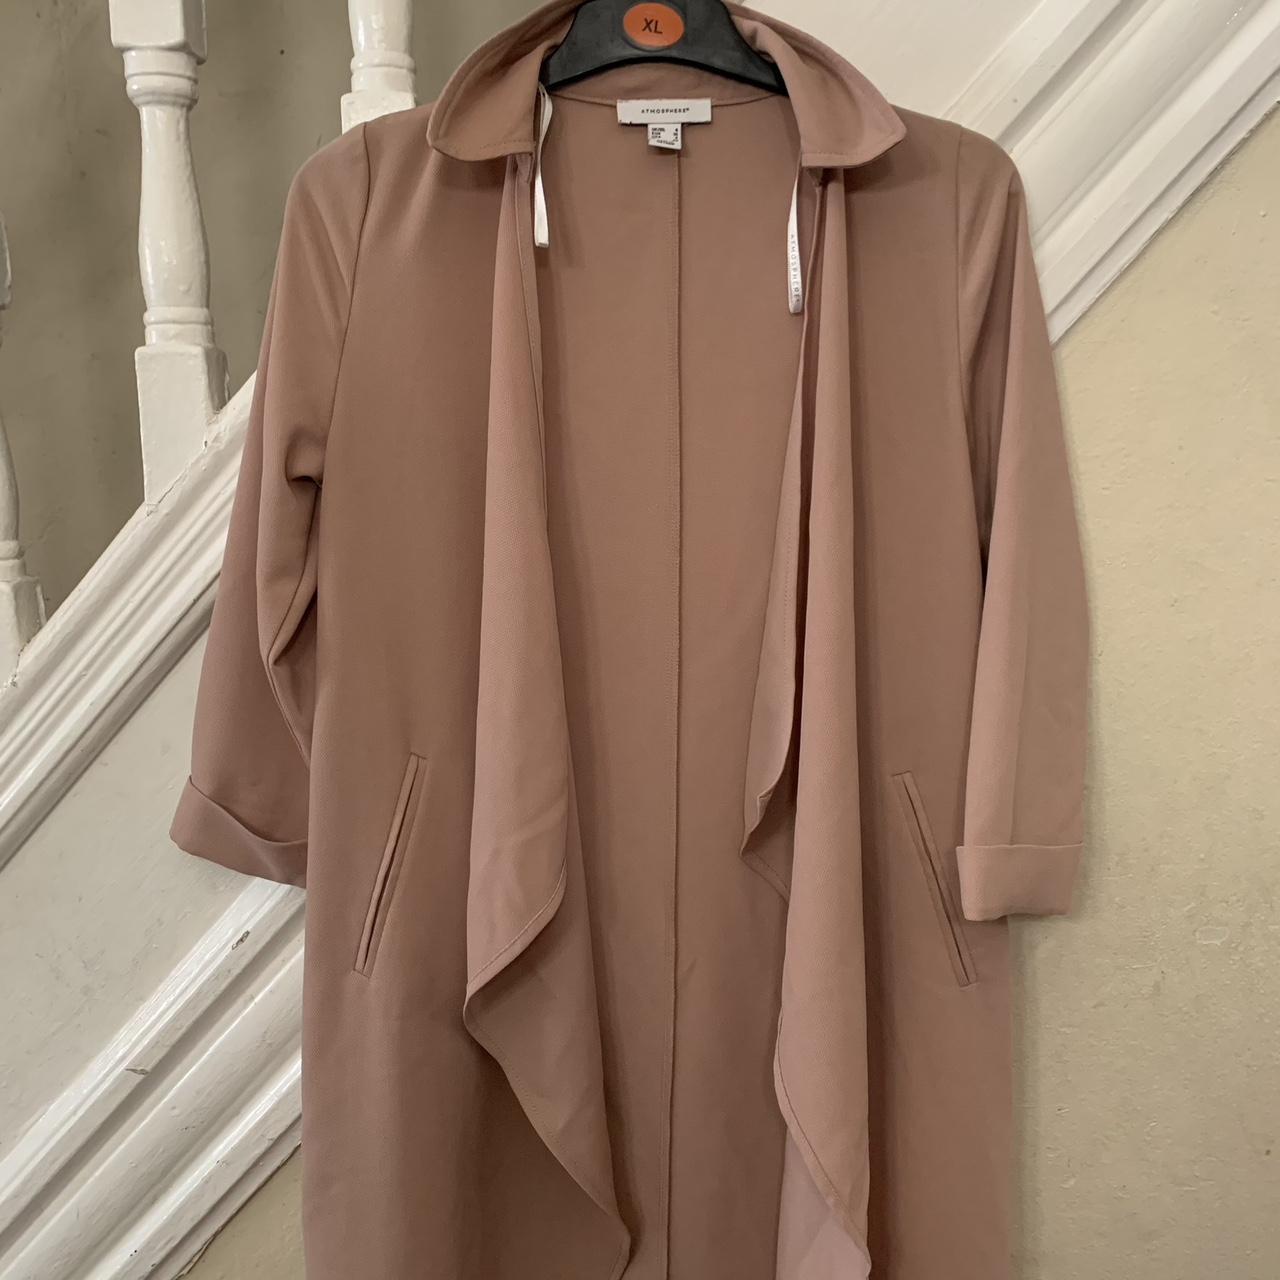 ATMOSPHERE Blush pink colored “trench ?” Coat - size... - Depop